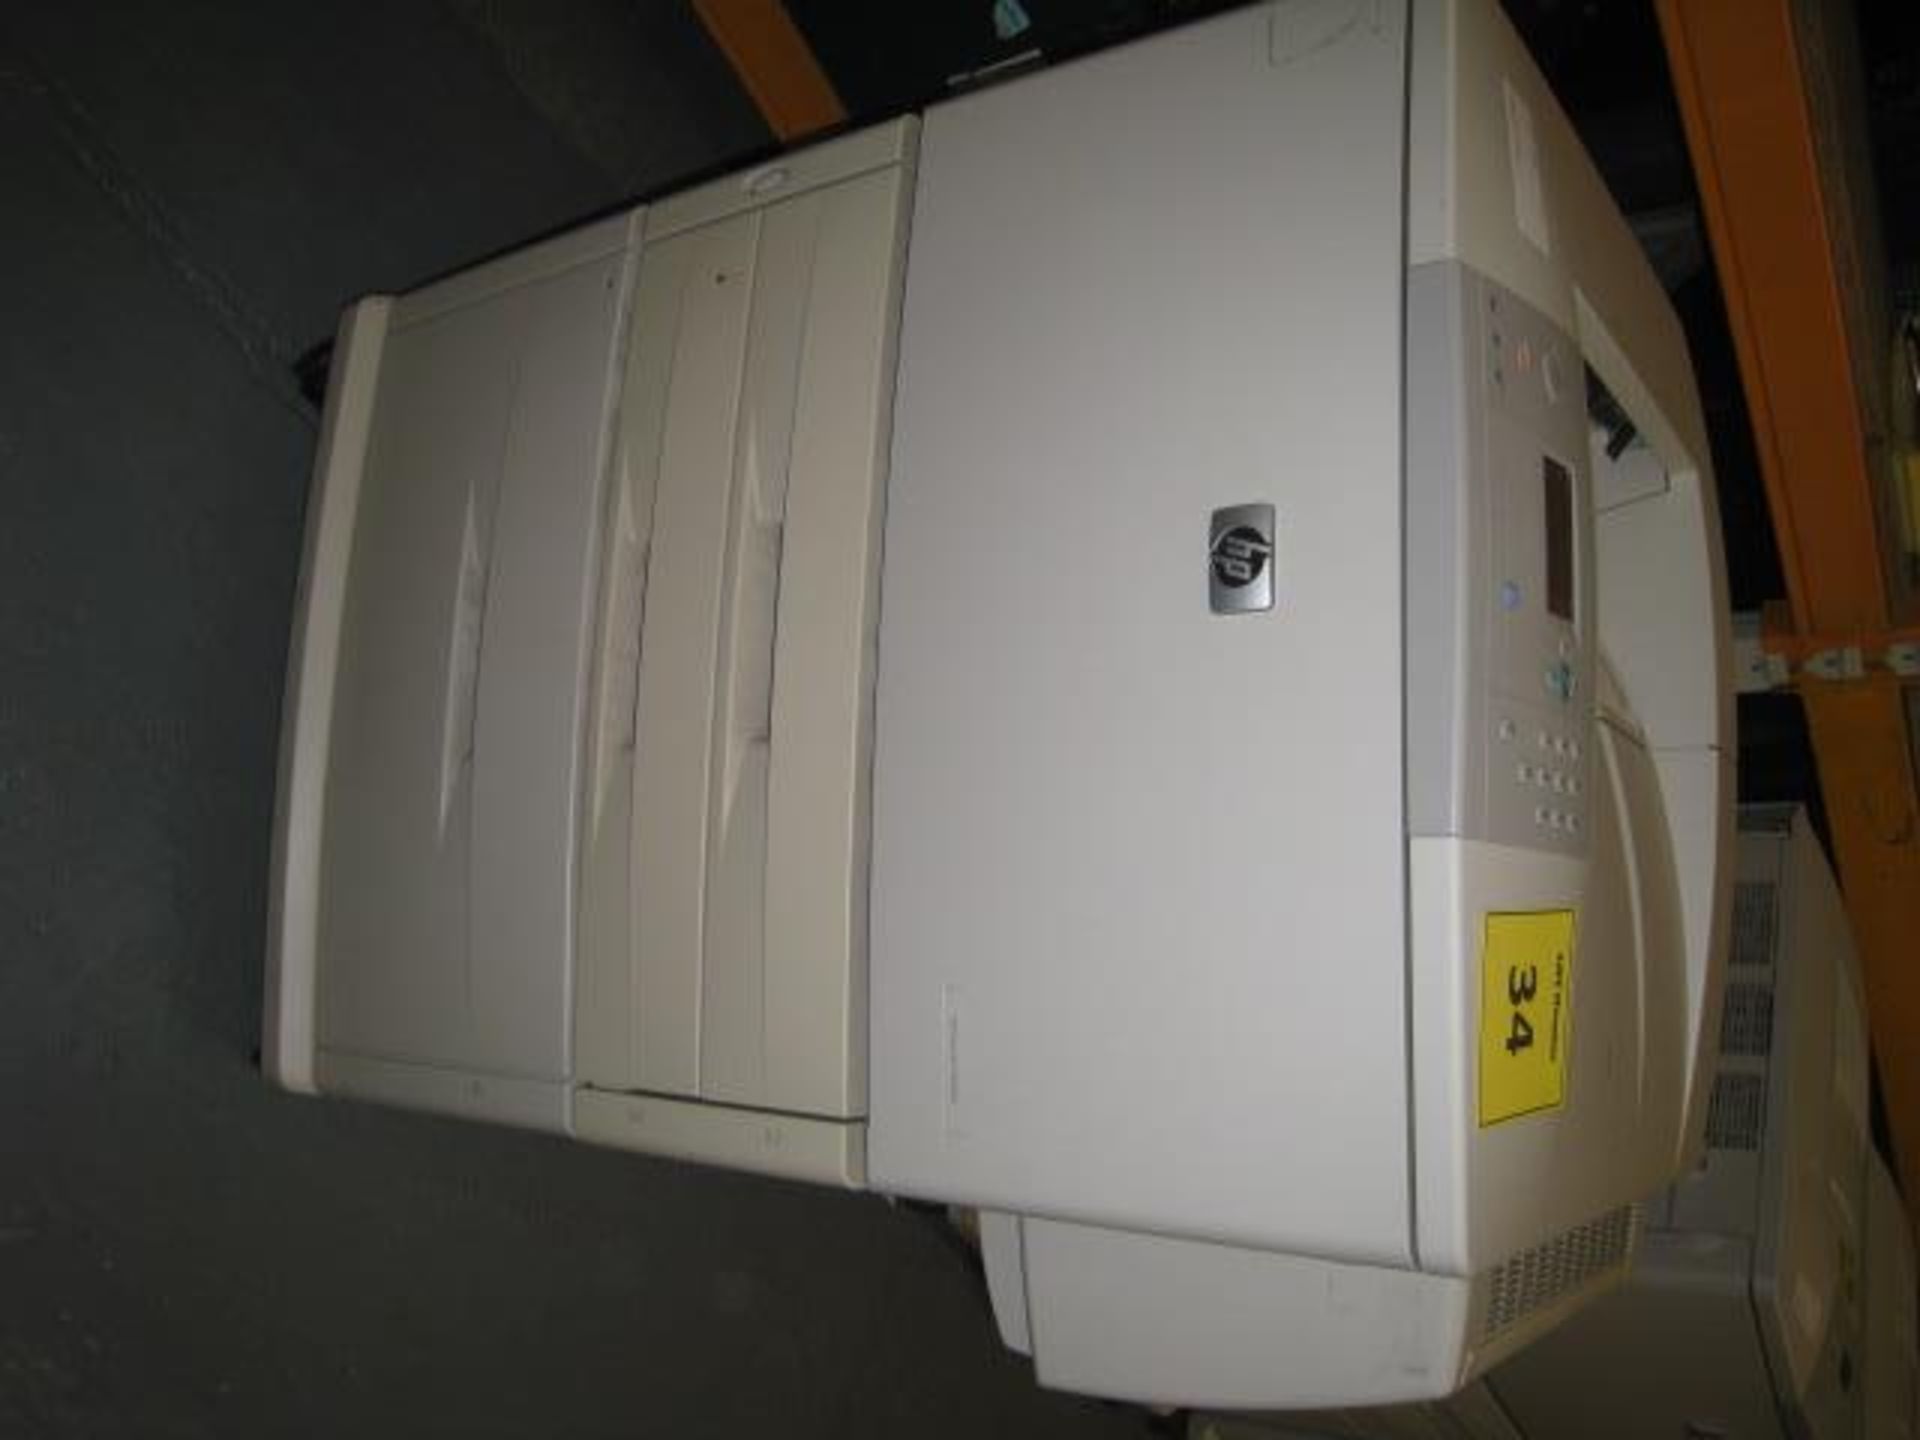 HP Laserjet 9050DN Workgroup Laser printer with wheeled lower feeder - Good quailty test print.